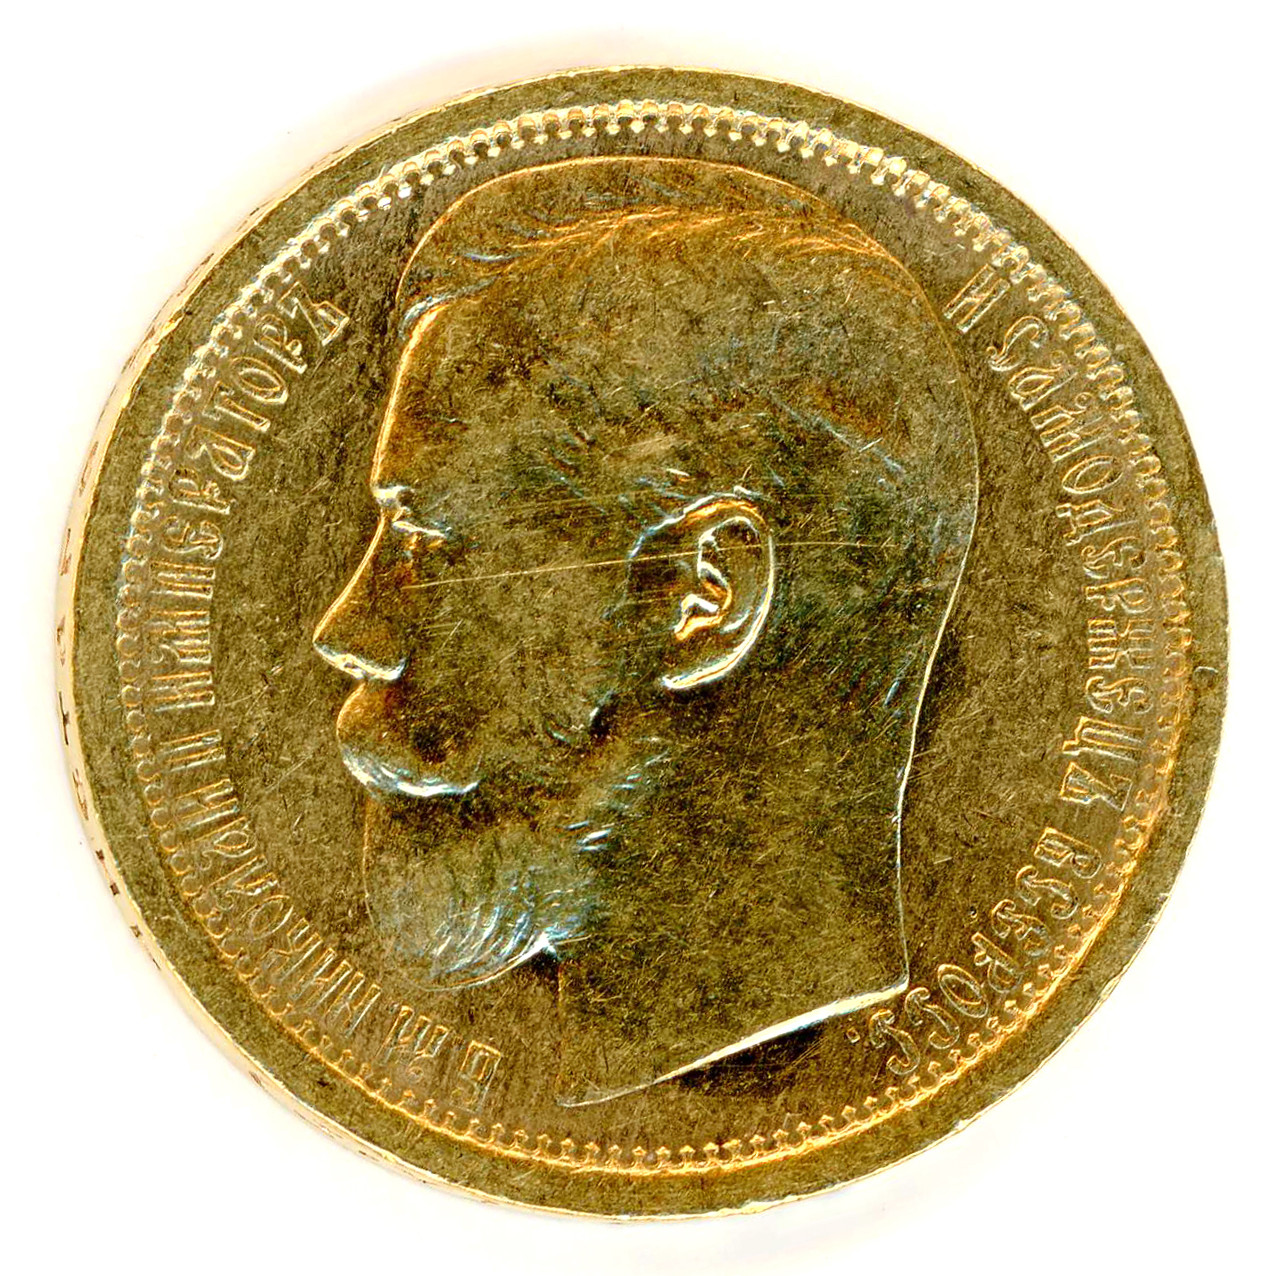 Russie - 15 Roubles - 1897 avers